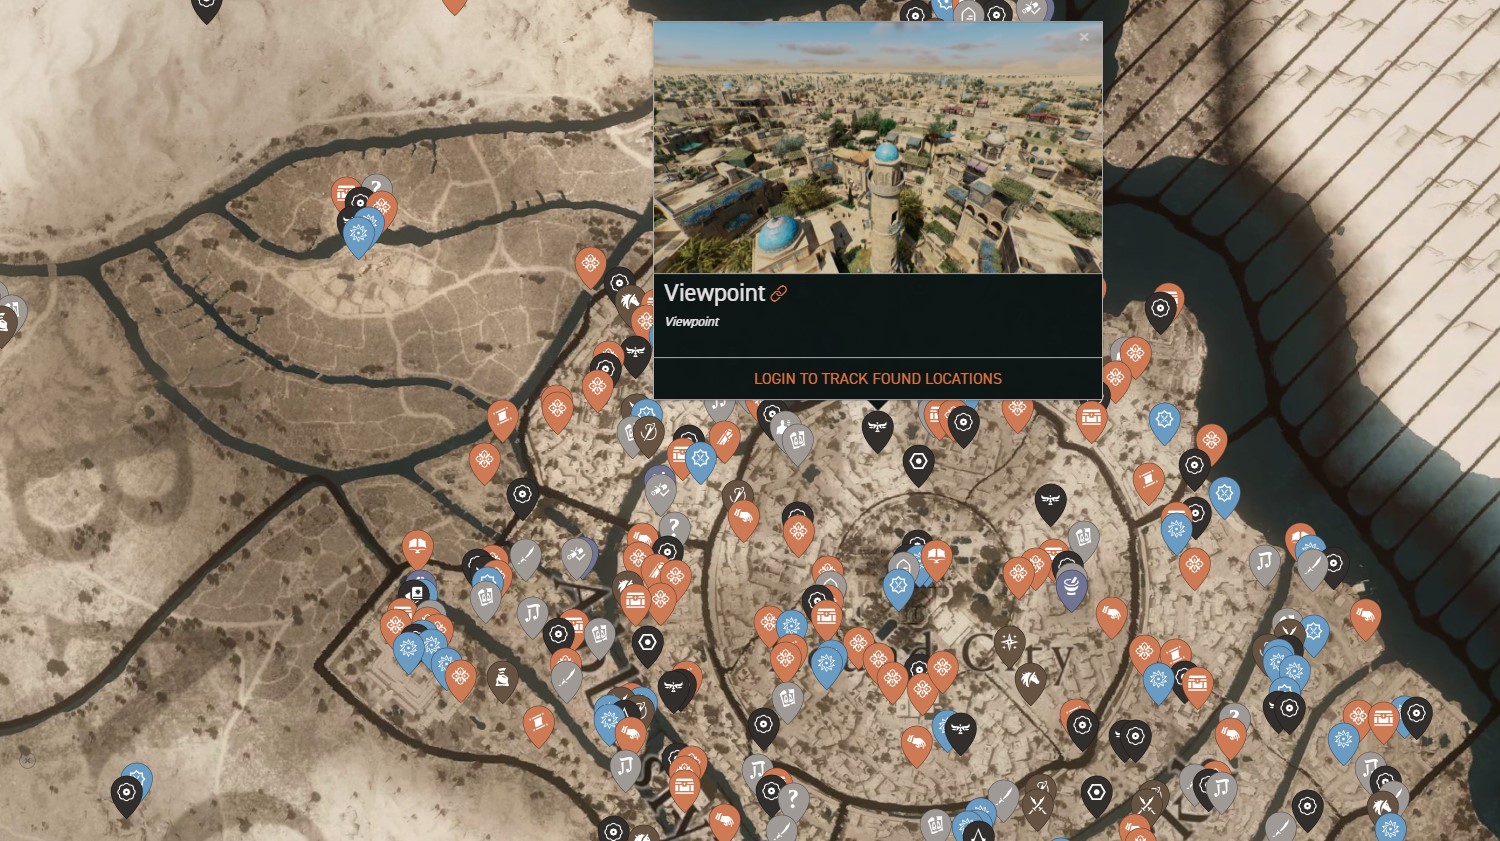 Assassin's Creed Mirage Interactive Map and Collectible Locations